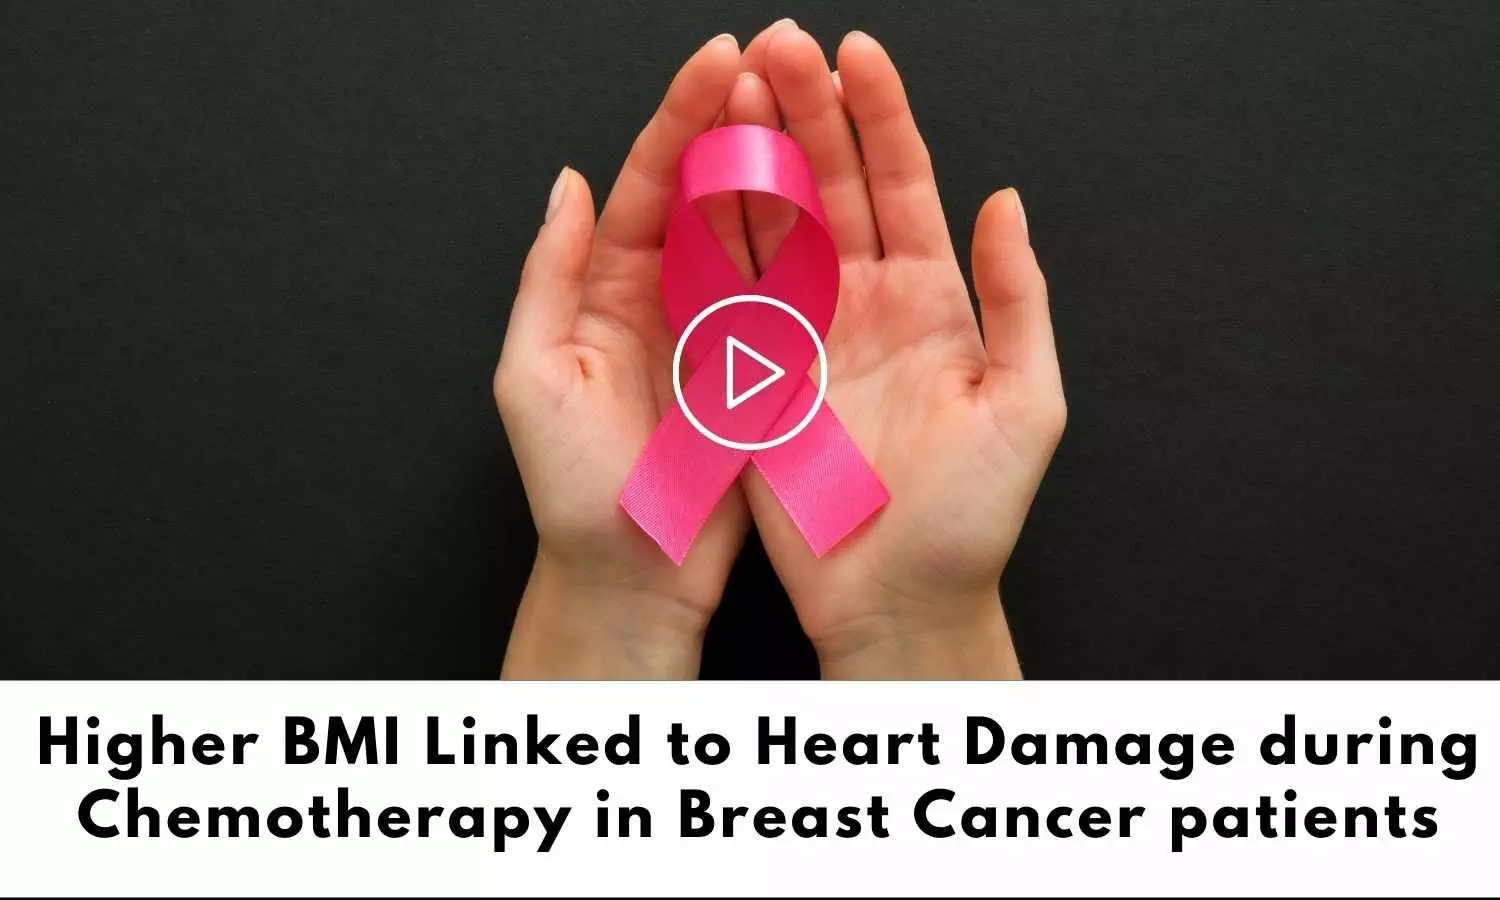 Higher BMI Linked to Heart Damage during Chemotherapy in Breast Cancer patients